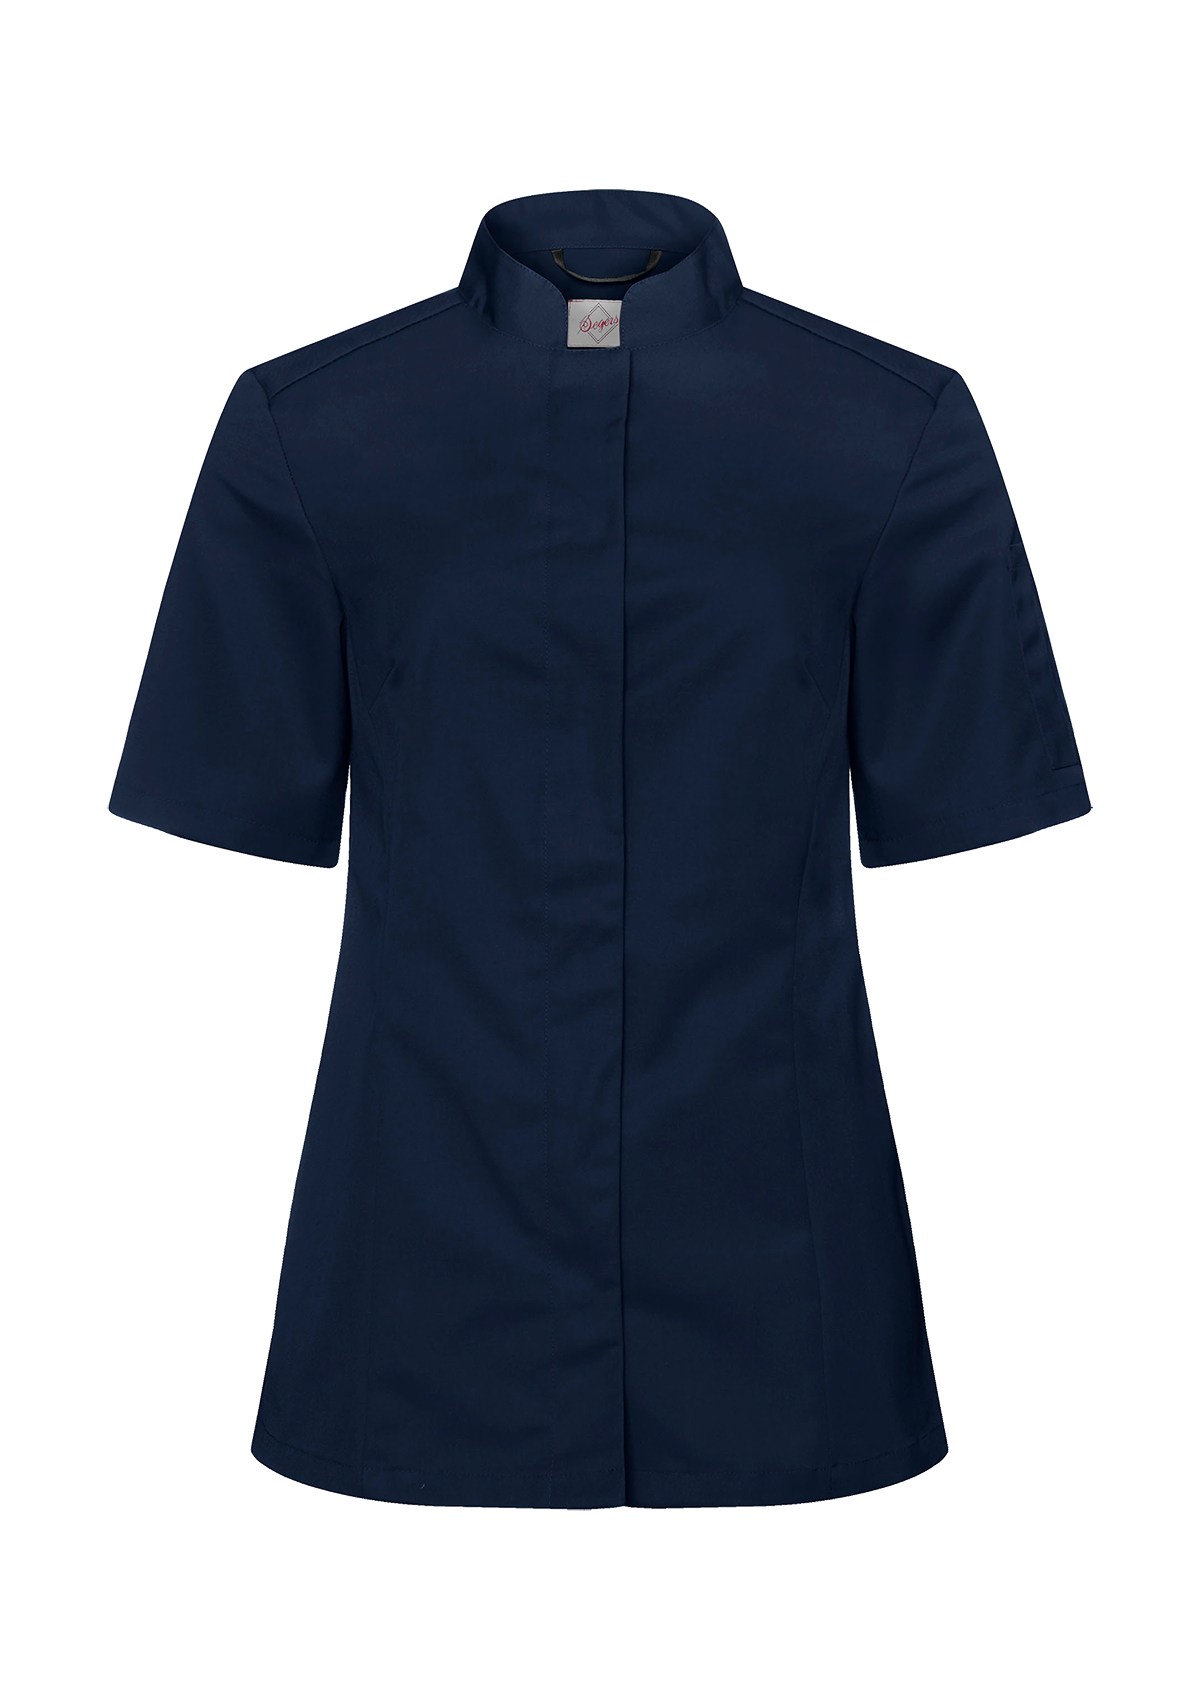 Women's Chef Shirt in slim-fit with short sleeves. Segers | Cookniche